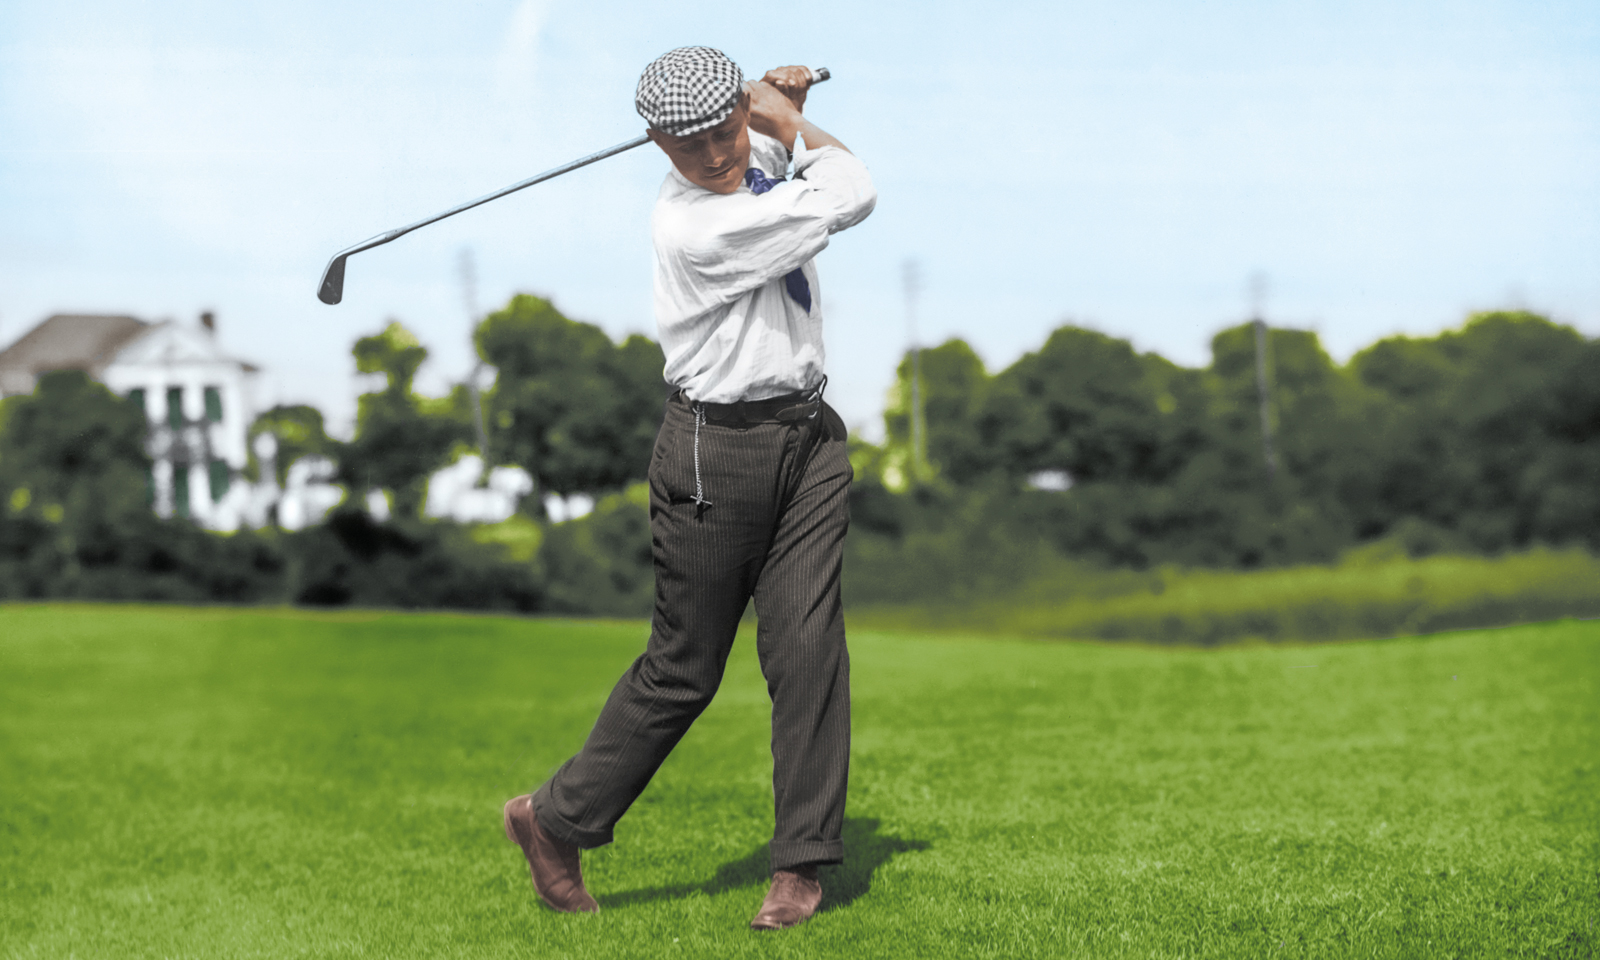 John Matthew Shippen, Jr. emerged to become American's first Golf Professional when he competed in the 1896 U.S. Open.